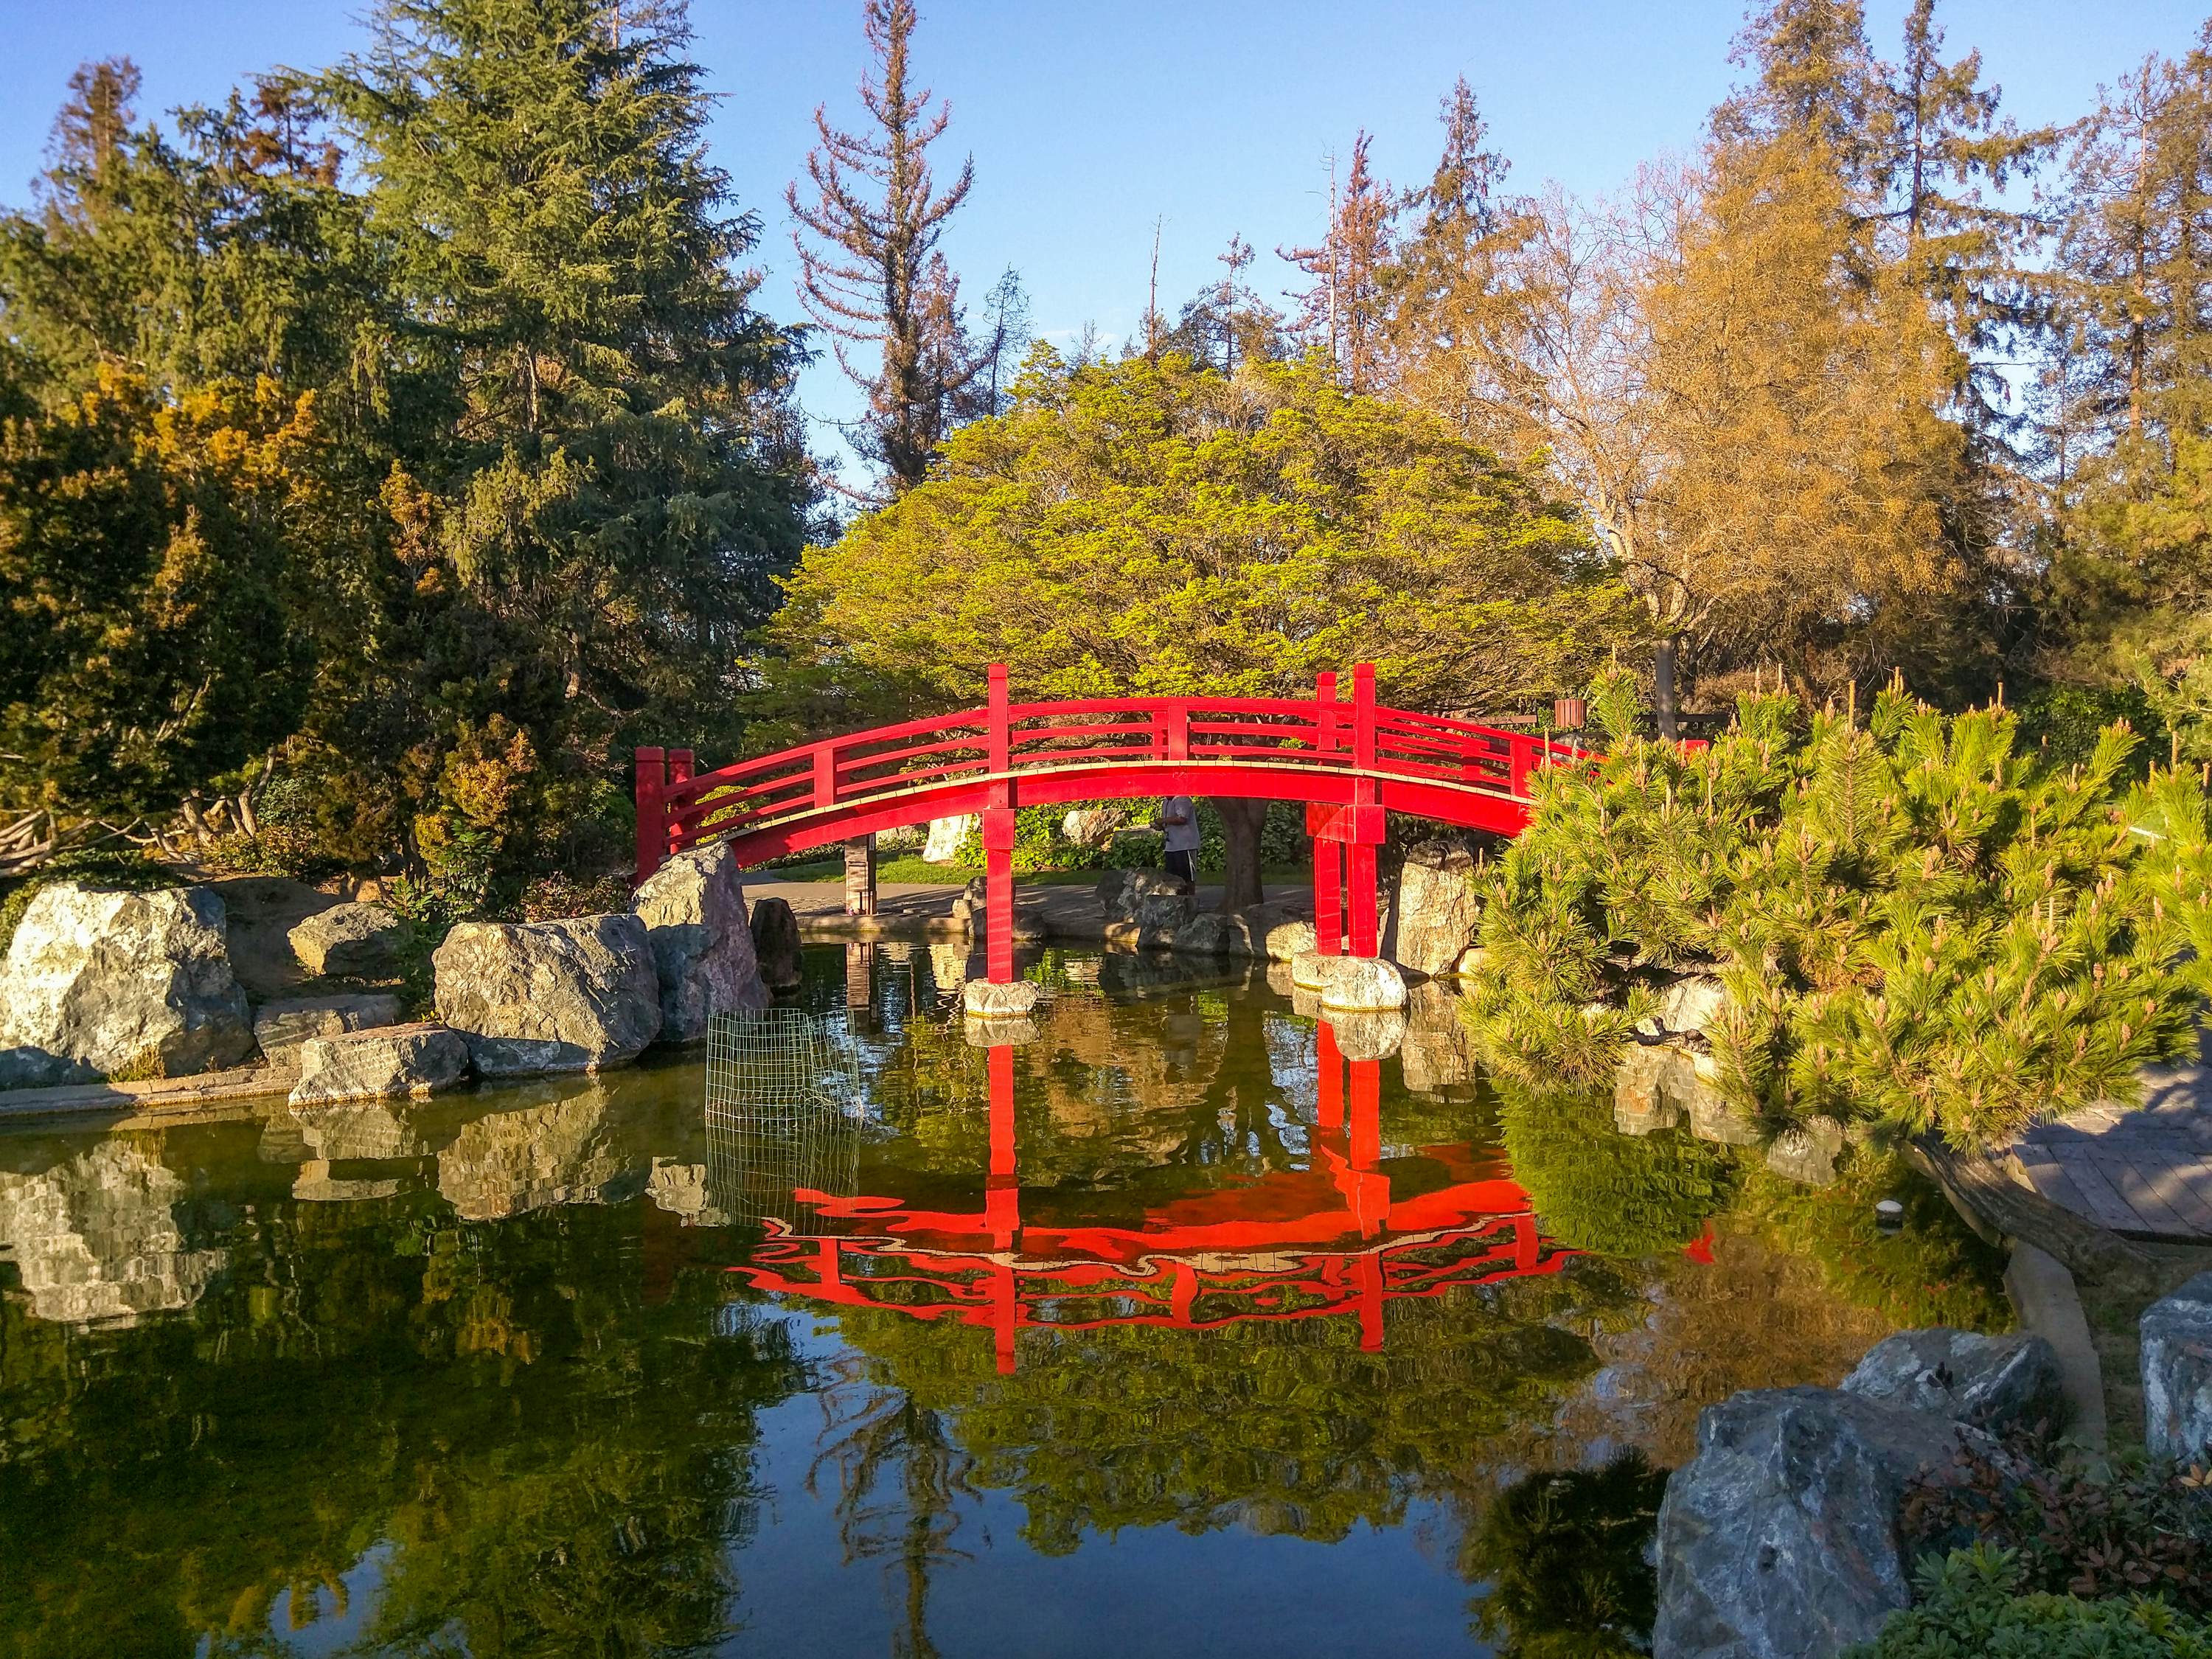 These San Jose city parks feel miles away city hustle - Lonely Planet